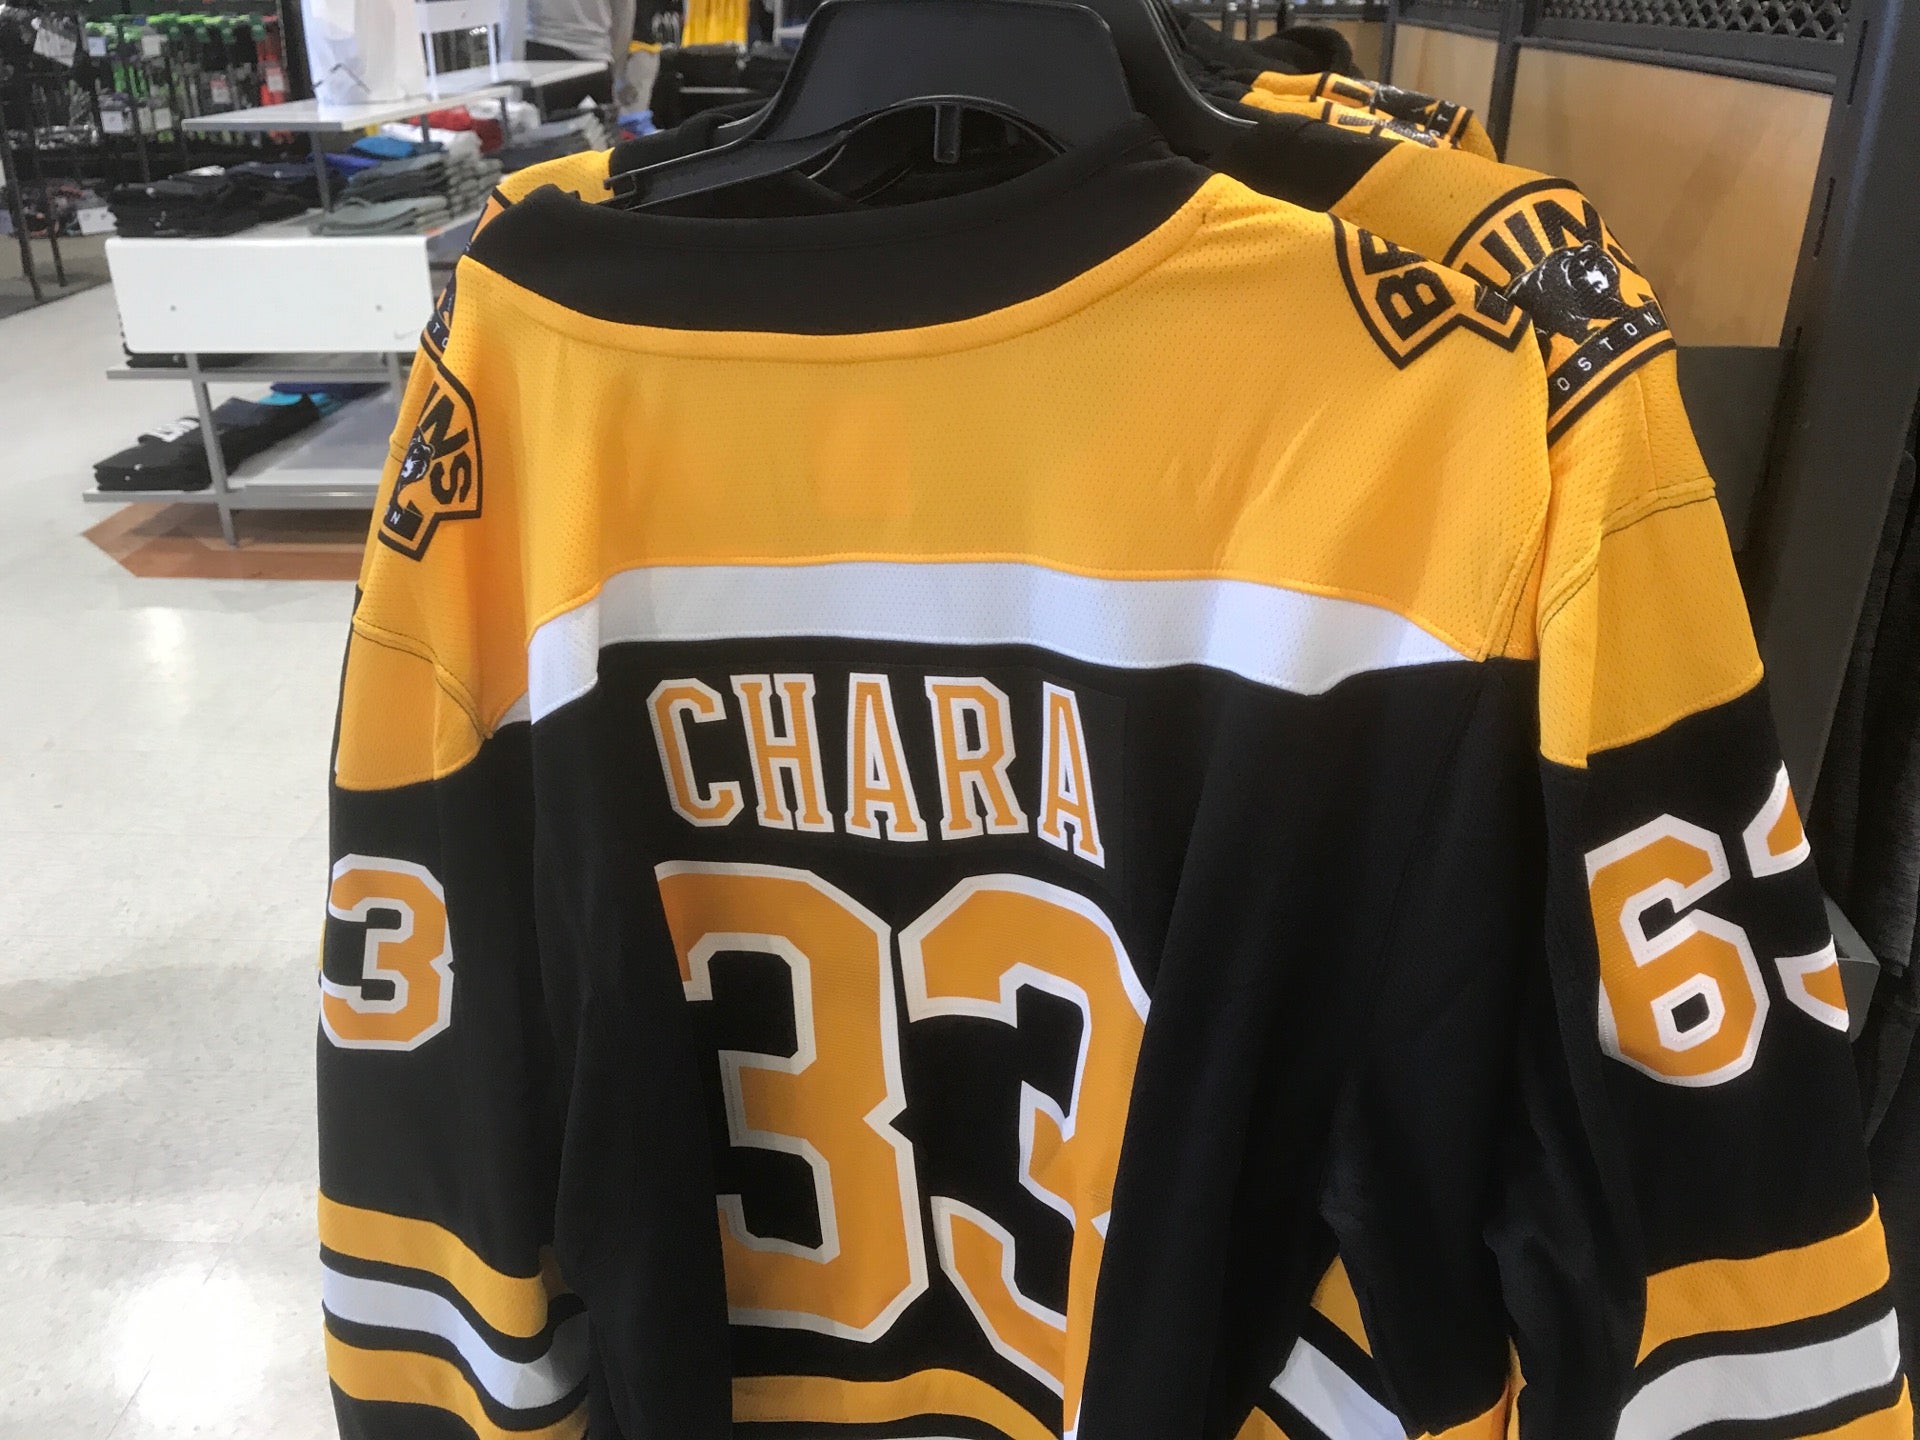 Boston Bruins Kids' Apparel  Curbside Pickup Available at DICK'S